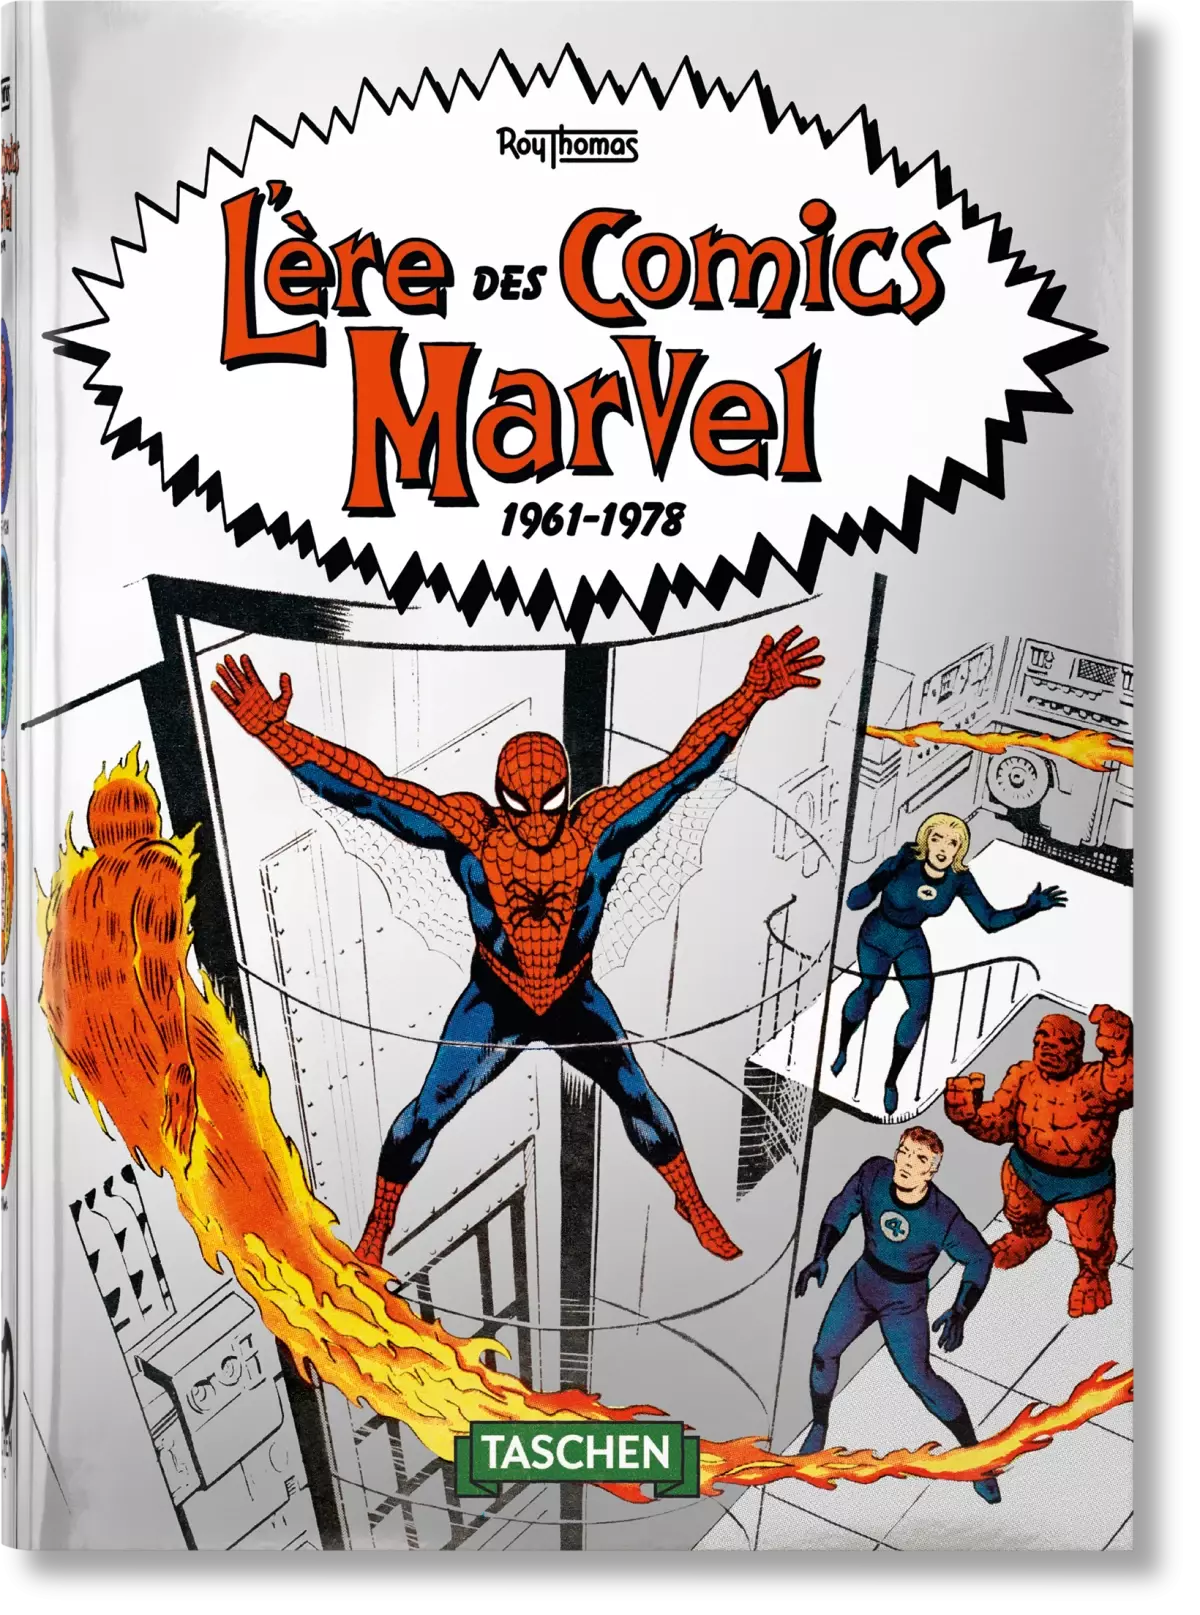 TASCHEN: The Marvel Age of Comics 1961-1978